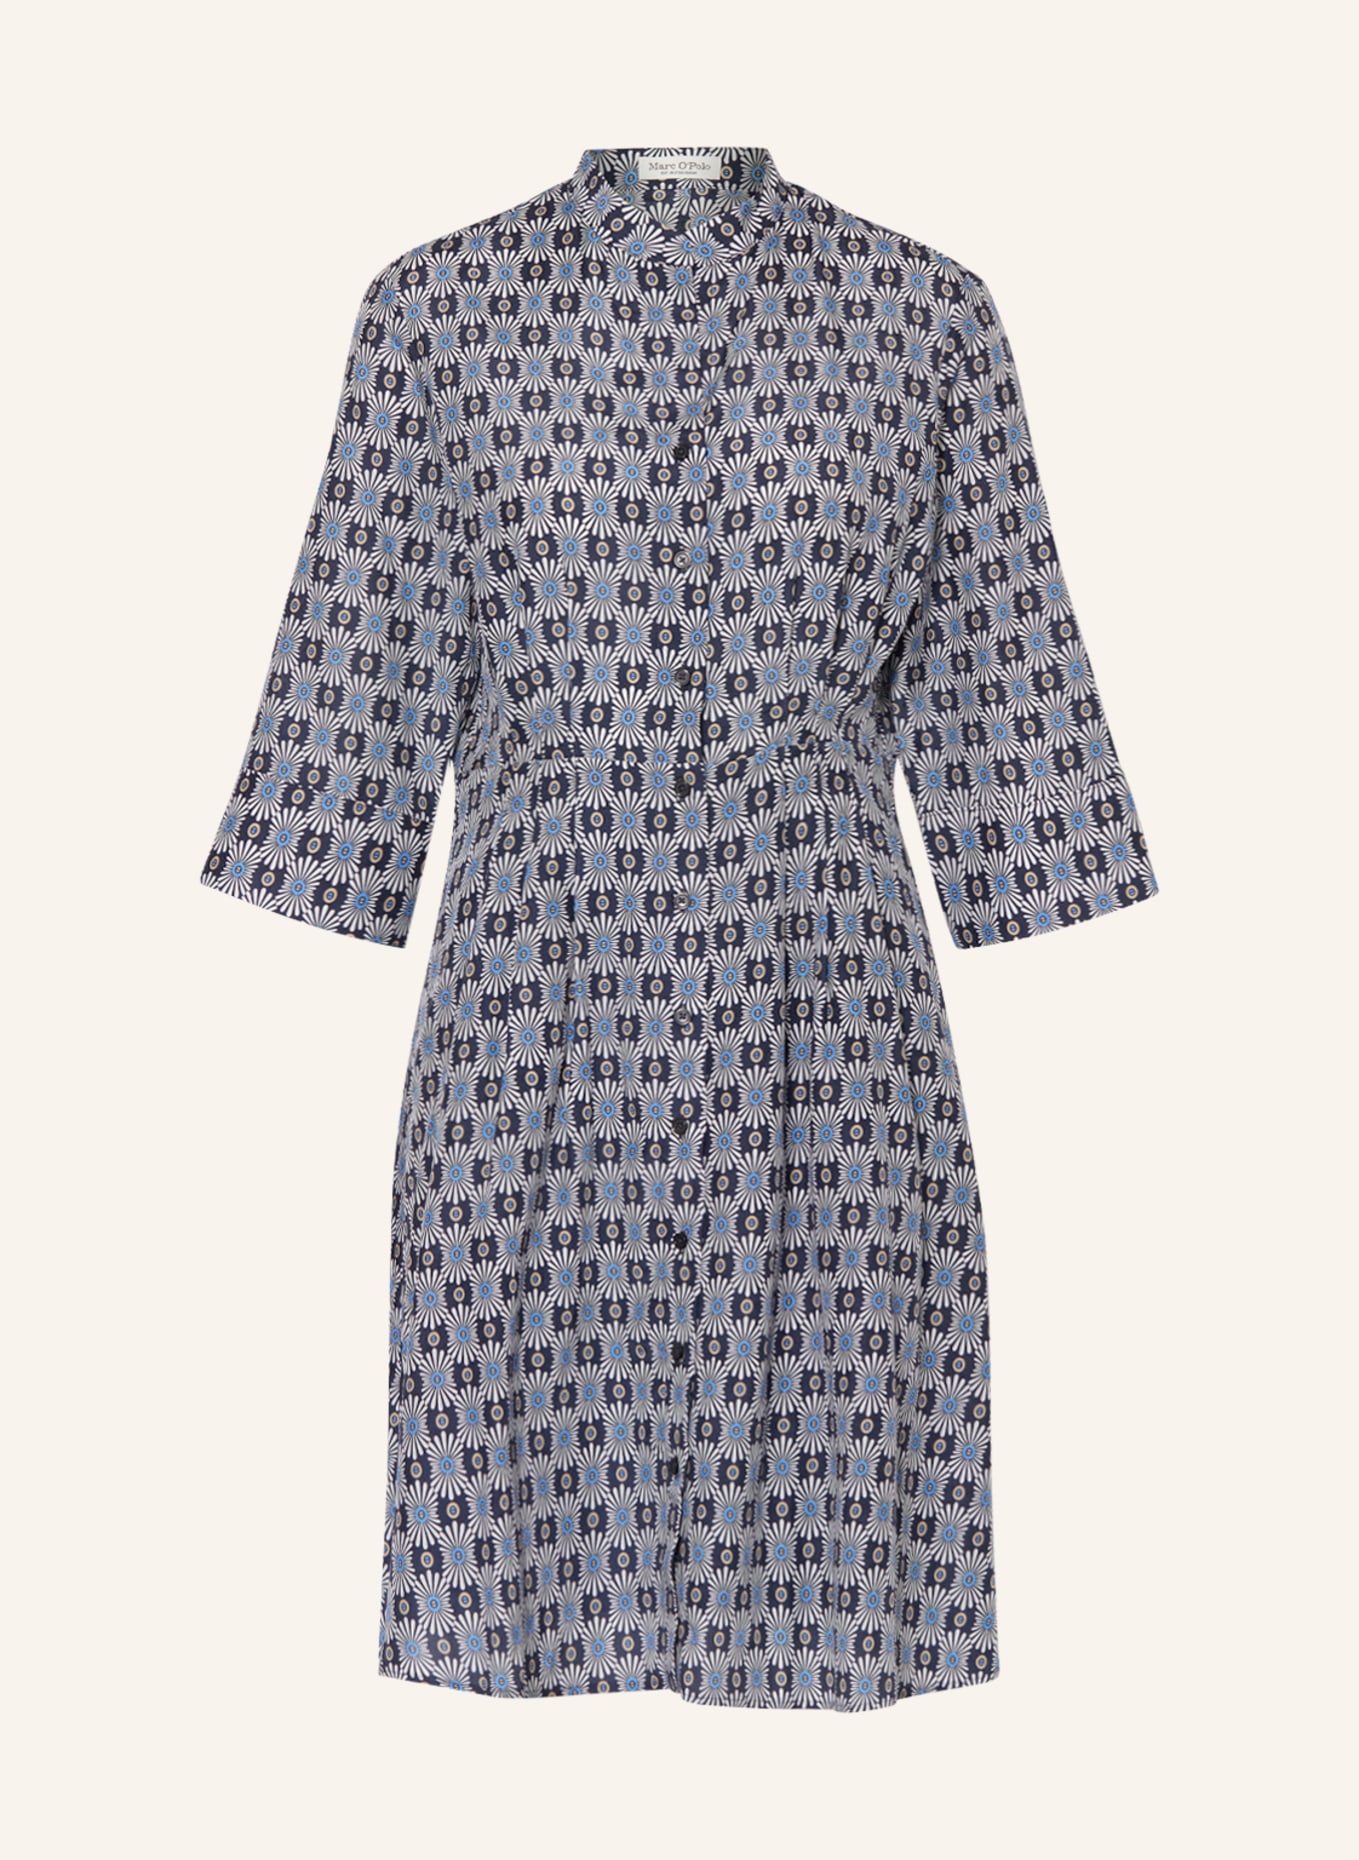 Marc O'Polo Shirt dress with 3/4 sleeves, Color: BLUE/ WHITE/ LIGHT BLUE (Image 1)